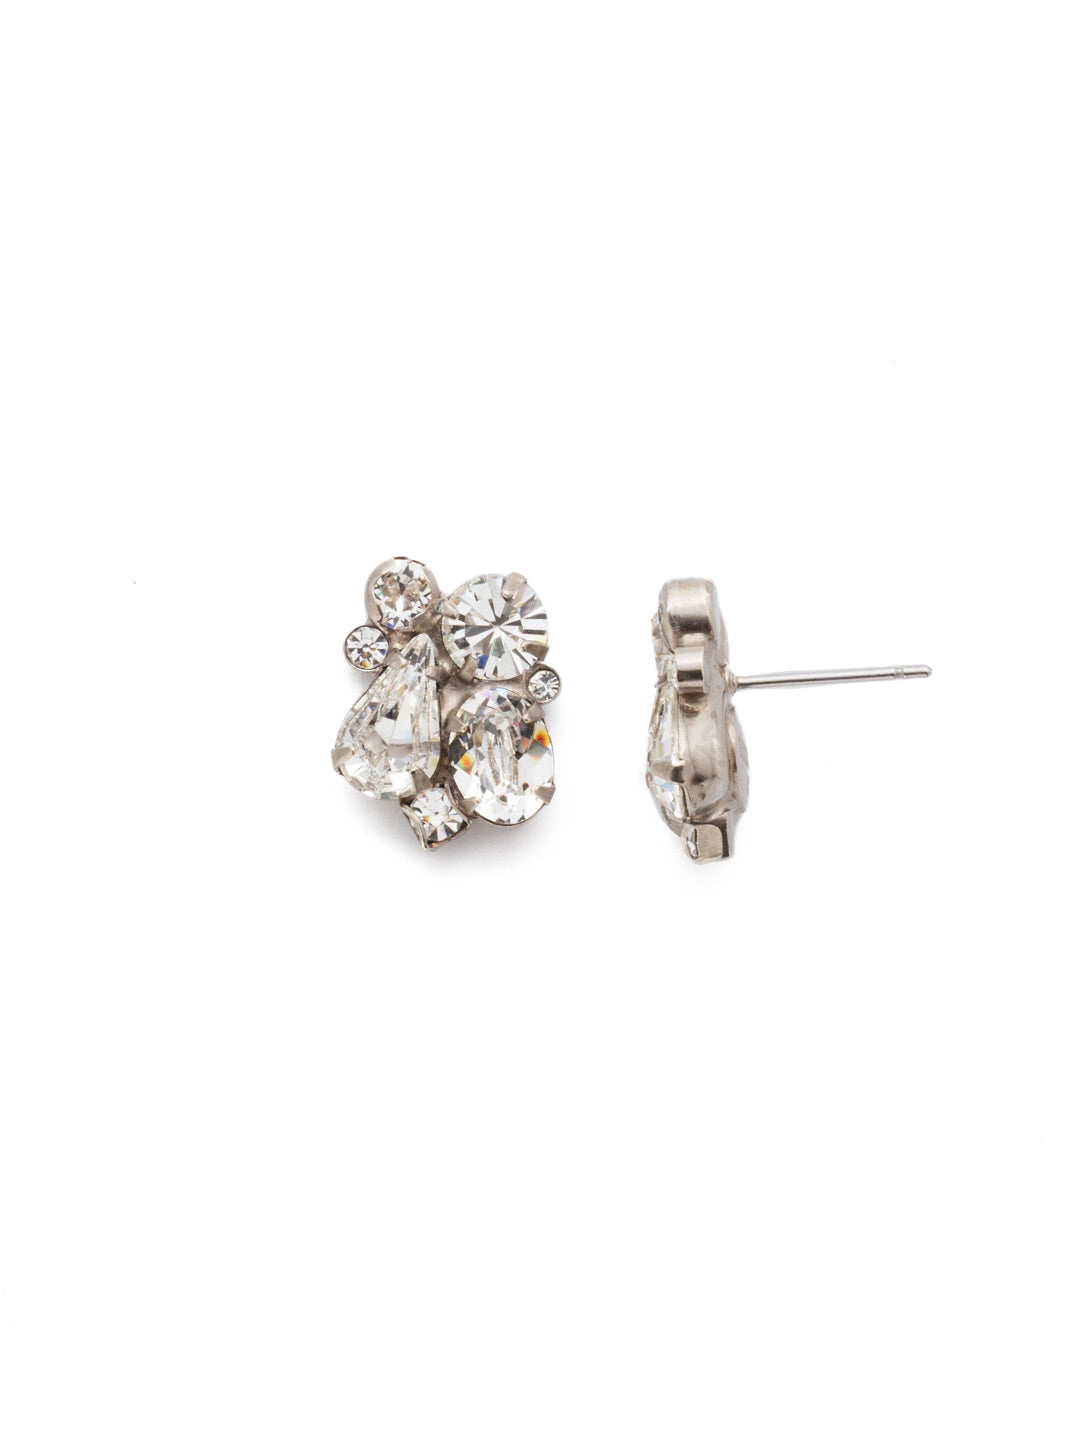 Daffodil Stud Earrings - EDU5ASCRY - <p>Features a cluster of crystals cut in pear, round, and oval shapes with a stud post. From Sorrelli's Crystal collection in our Antique Silver-tone finish.</p>